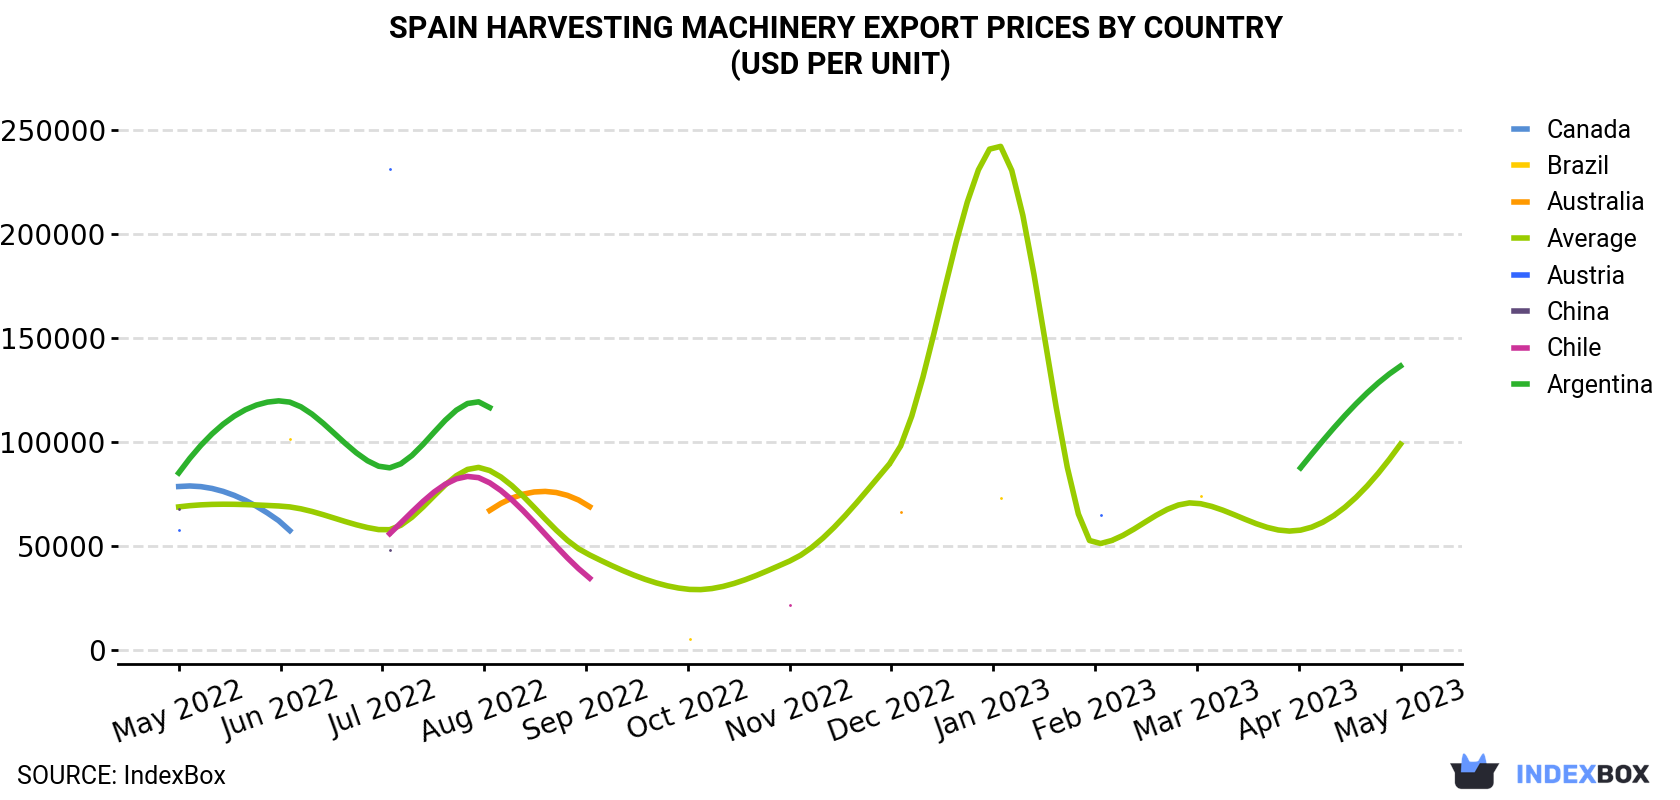 Spain Harvesting Machinery Export Prices By Country (USD Per Unit)